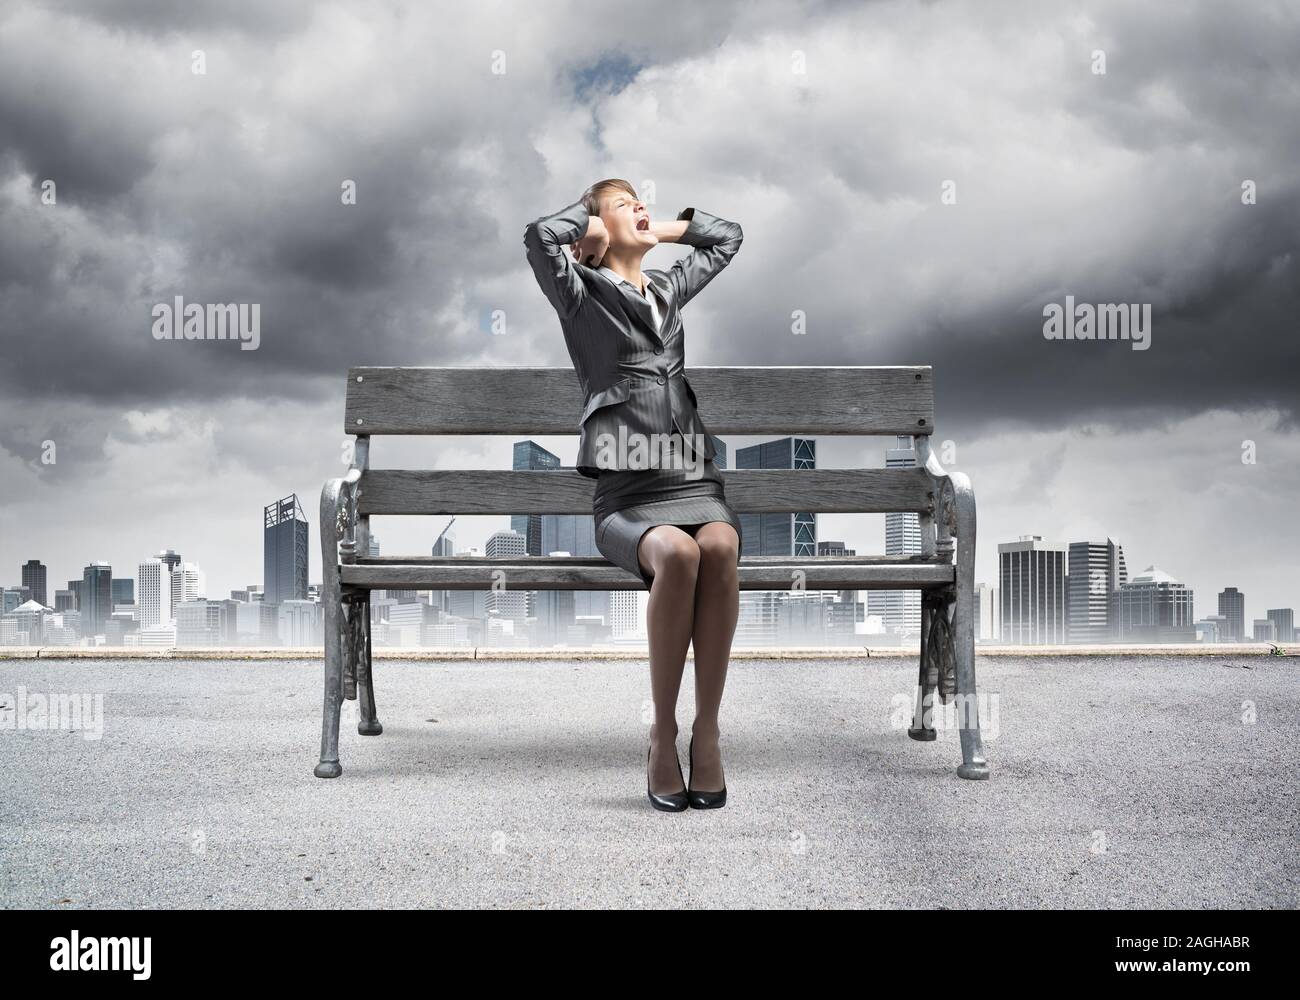 Stressful woman sitting on wooden bench Stock Photo